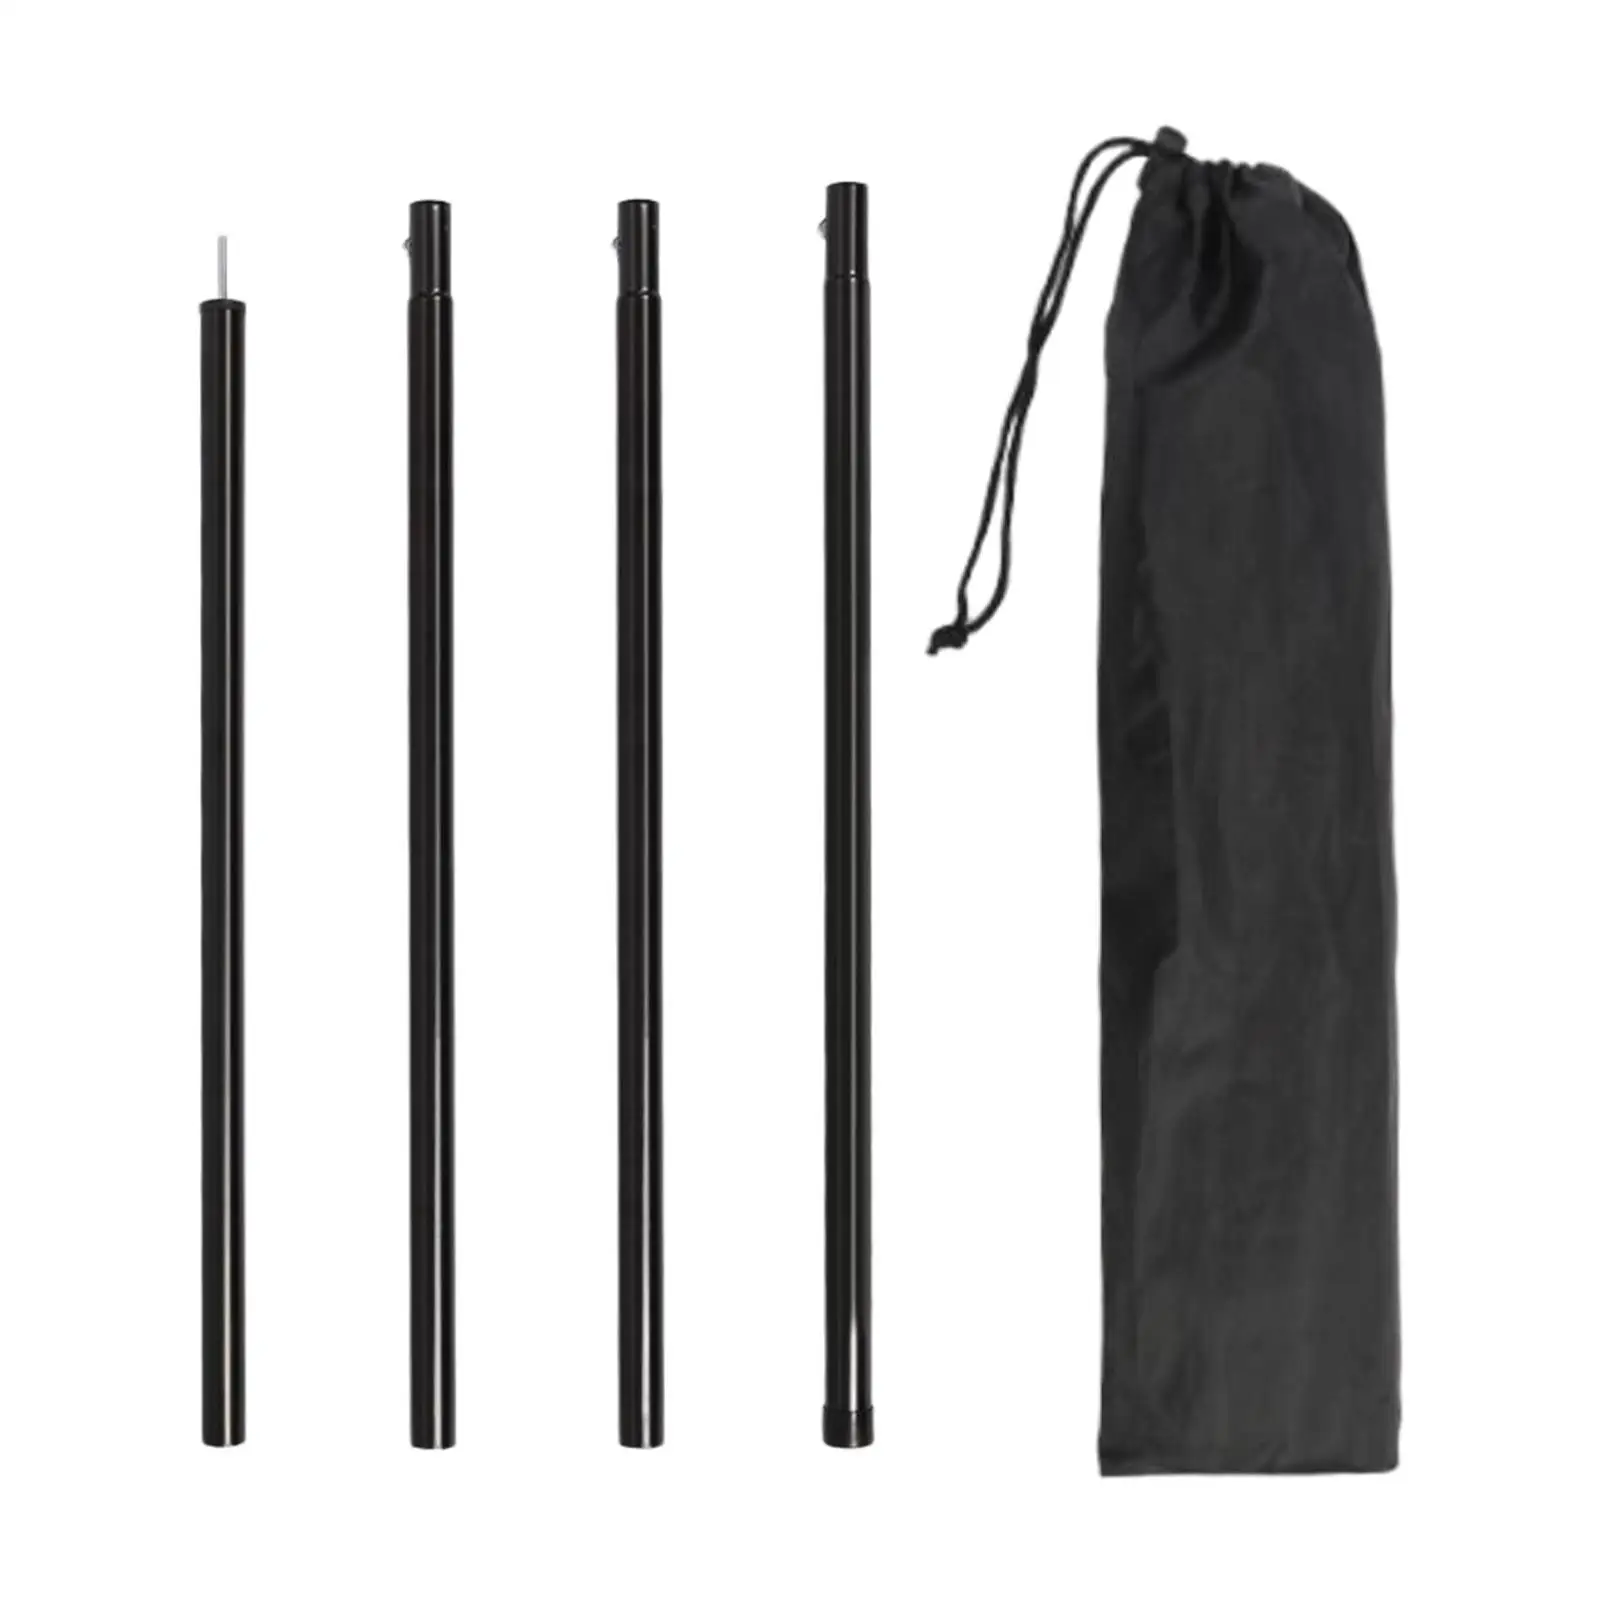 4 Pieces Tarp Poles Tent Rods Garden Shelter Awning Support Poles with Storage Bag Detachable for Camping Backpacking Hiking